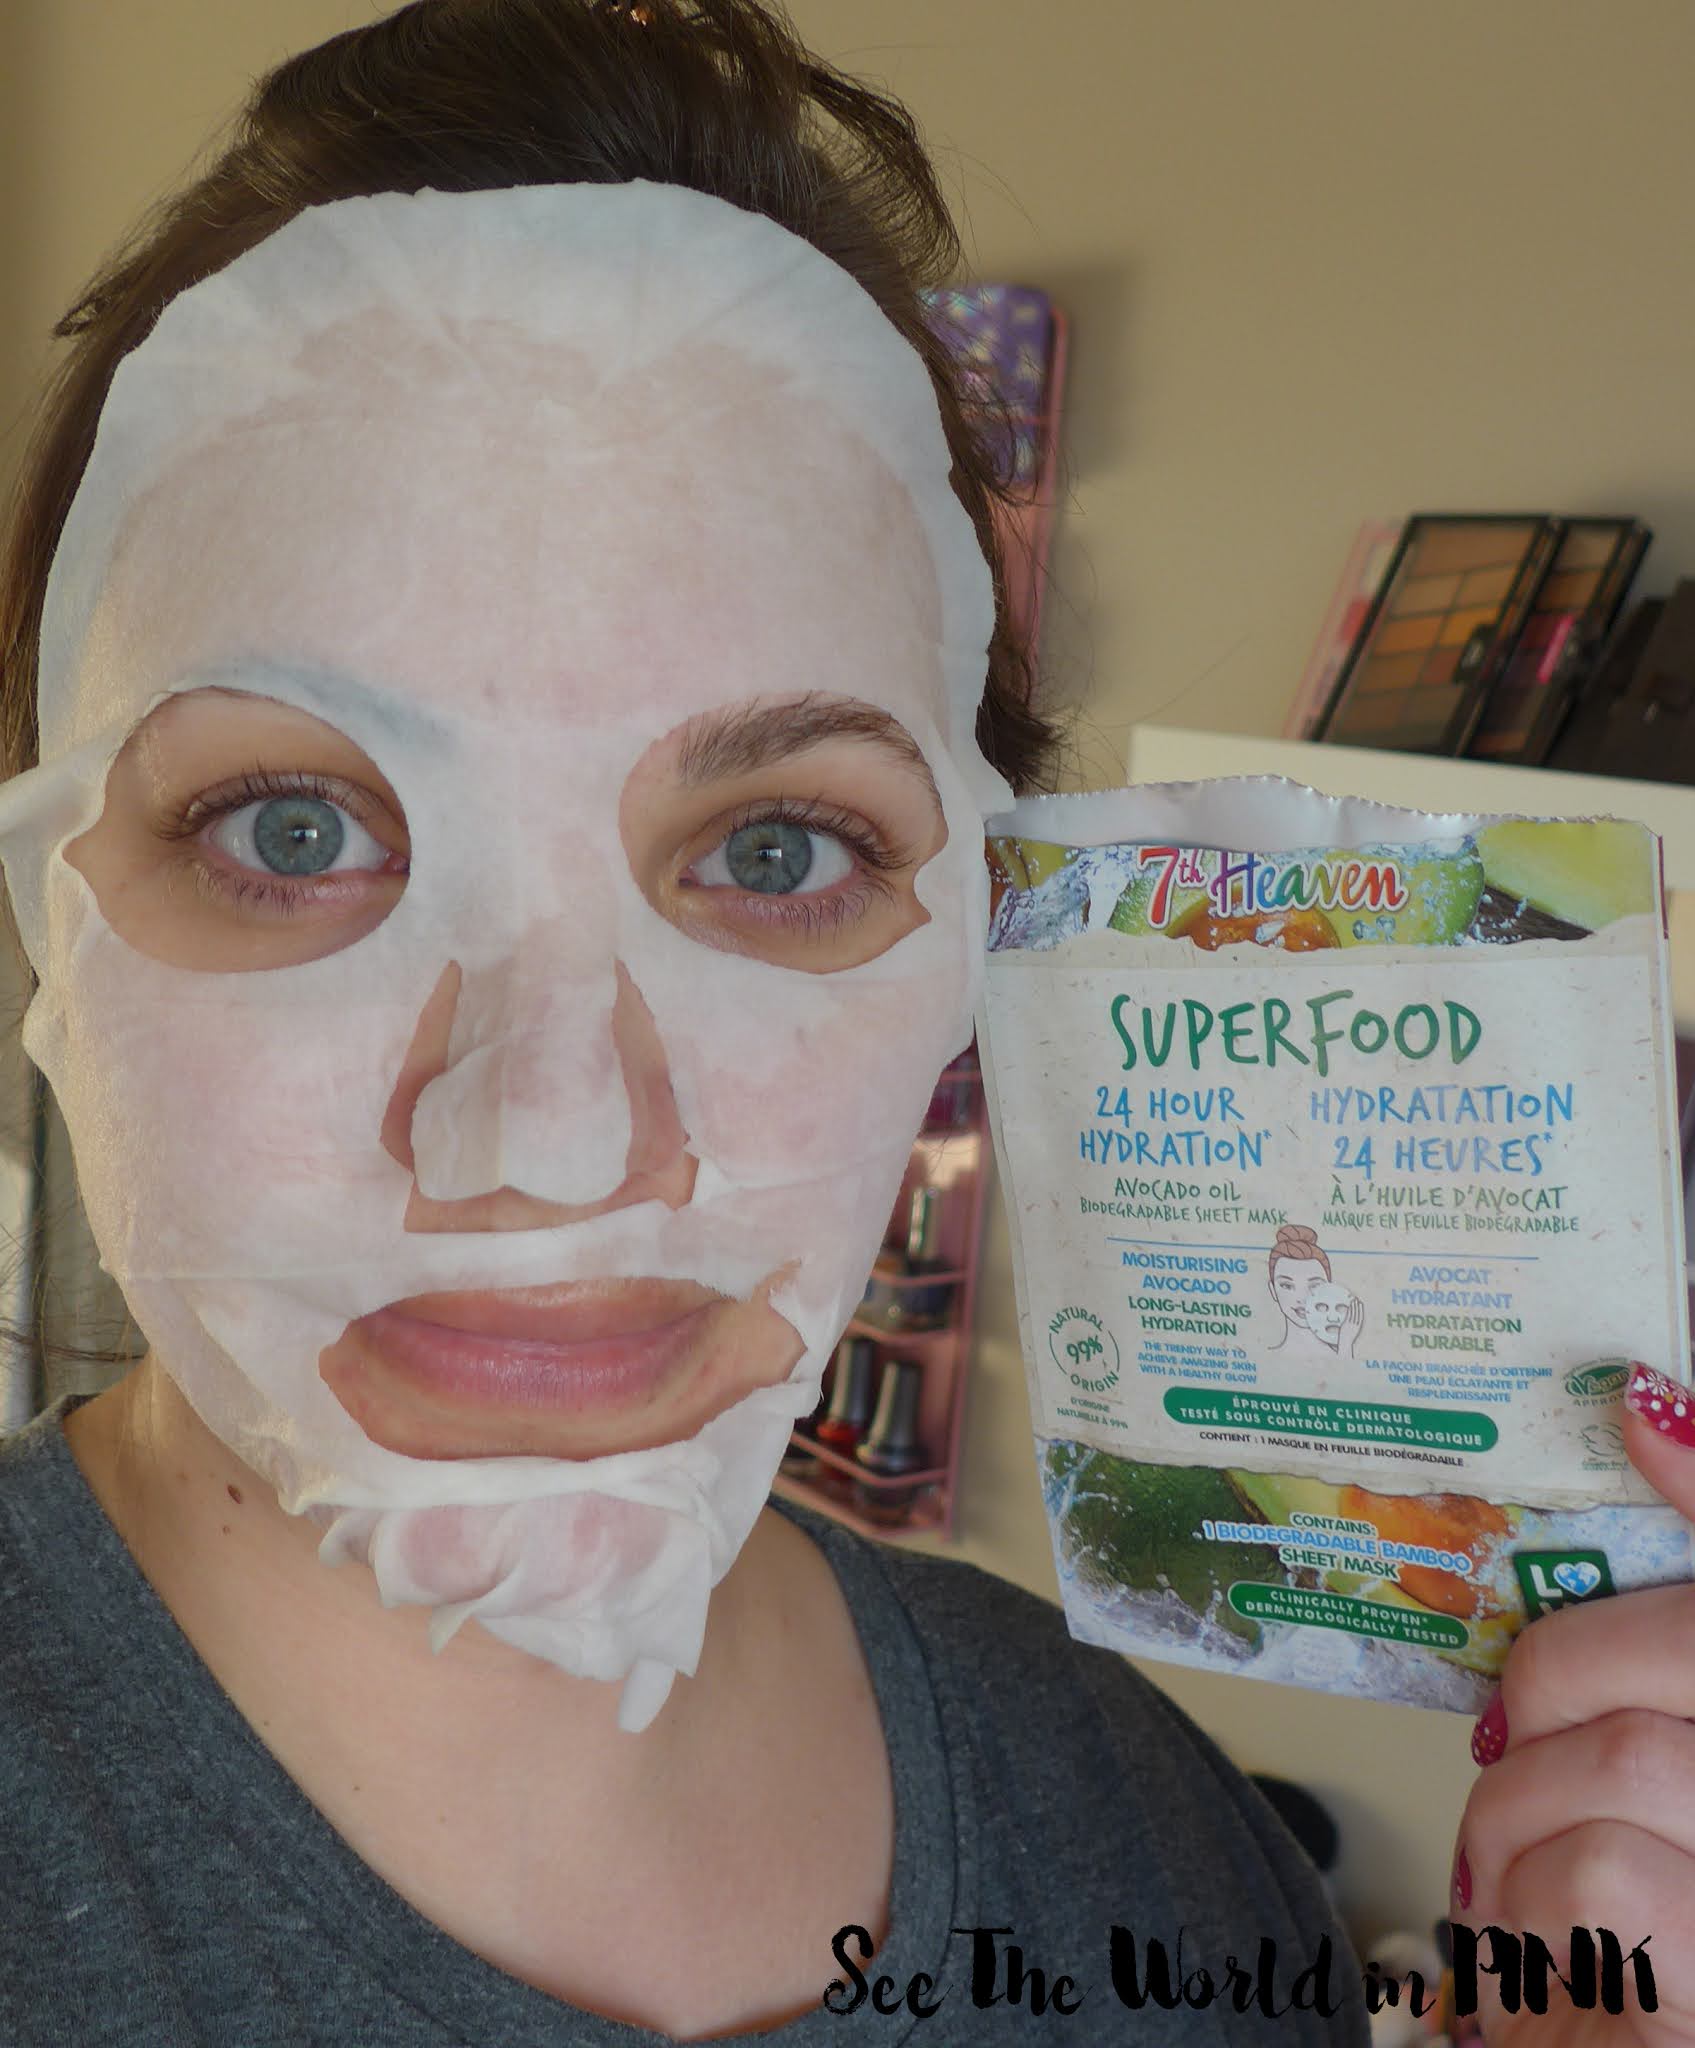 7th Heaven Superfood Avocado, Rice Protein, and Turmeric Bamboo Biodegradable Sheet Masks